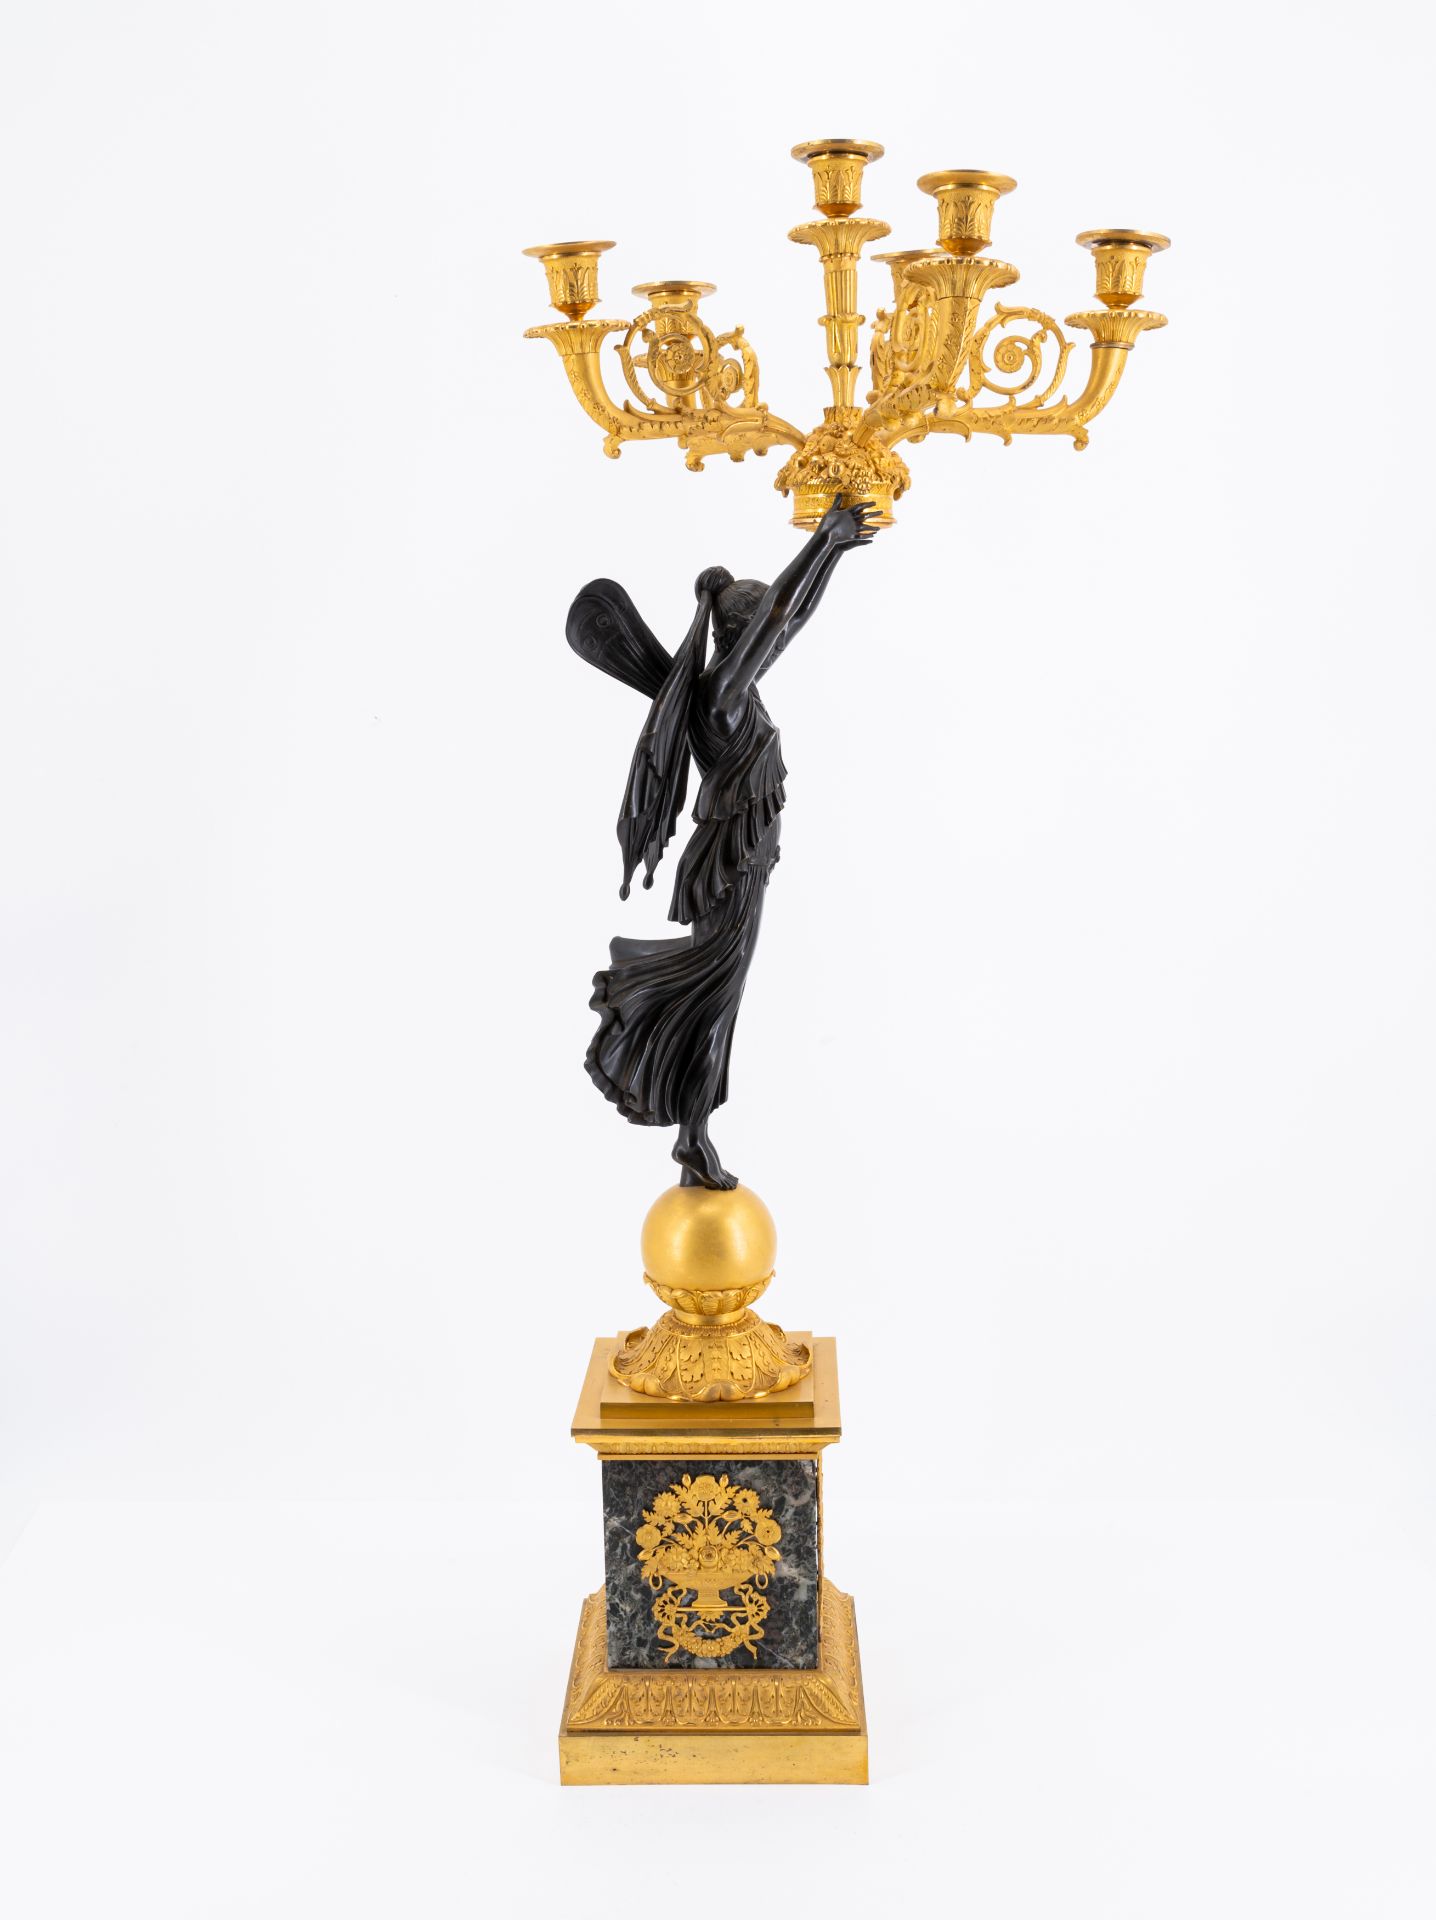 Pair of magnificent Empire candelabra with psyches - Image 7 of 7